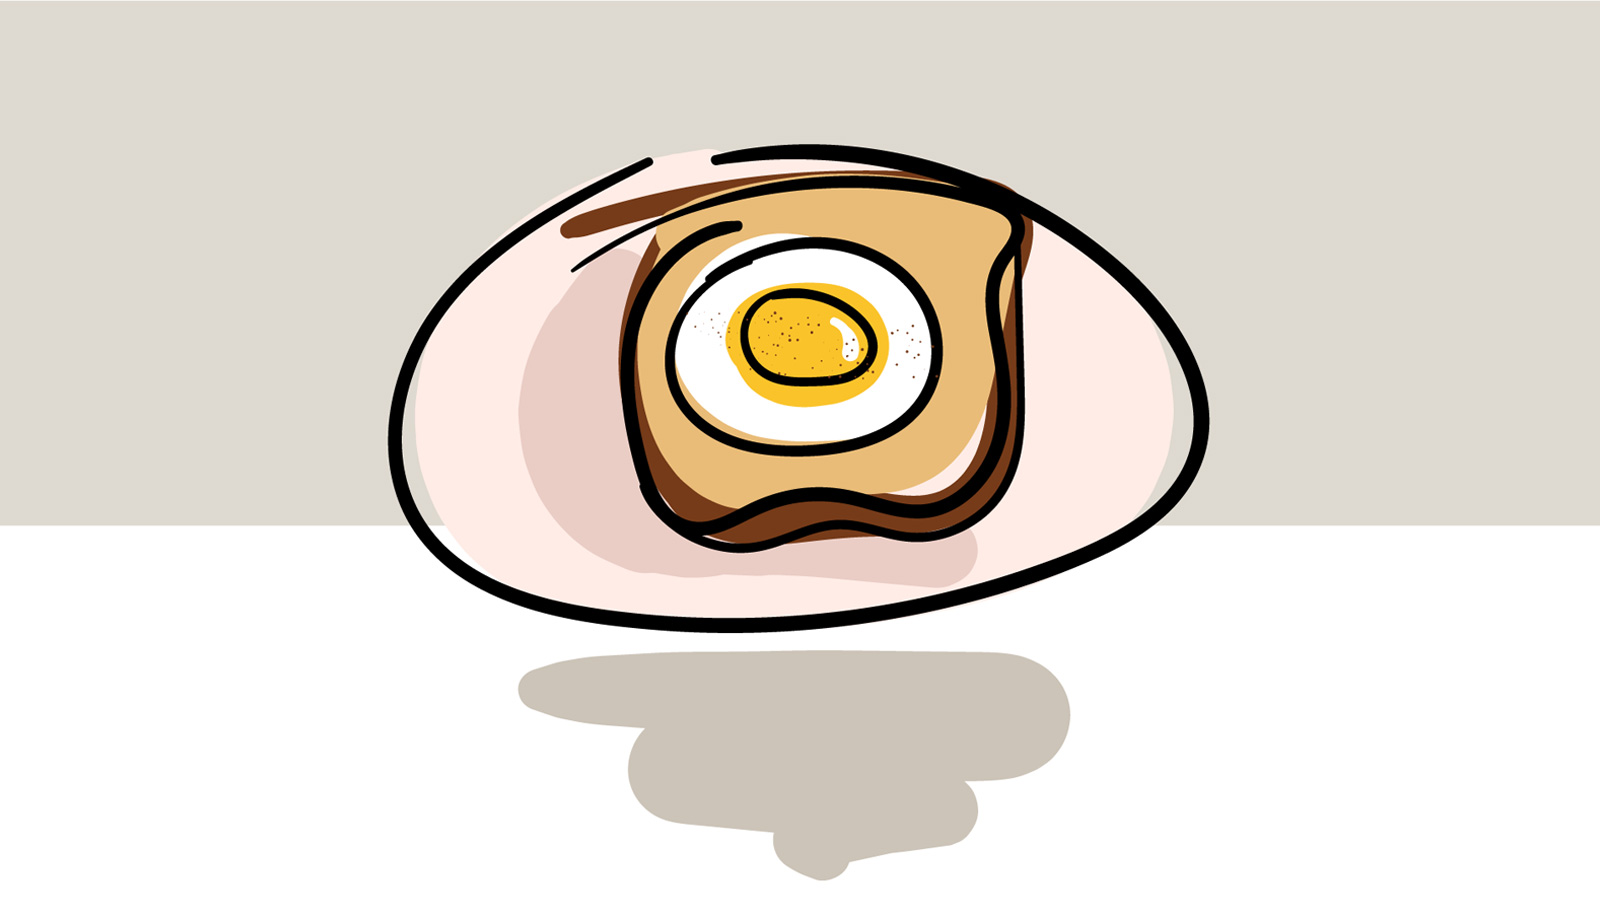 A depiction of a nutritious air fryer egg on wholemeal toast on a light plate